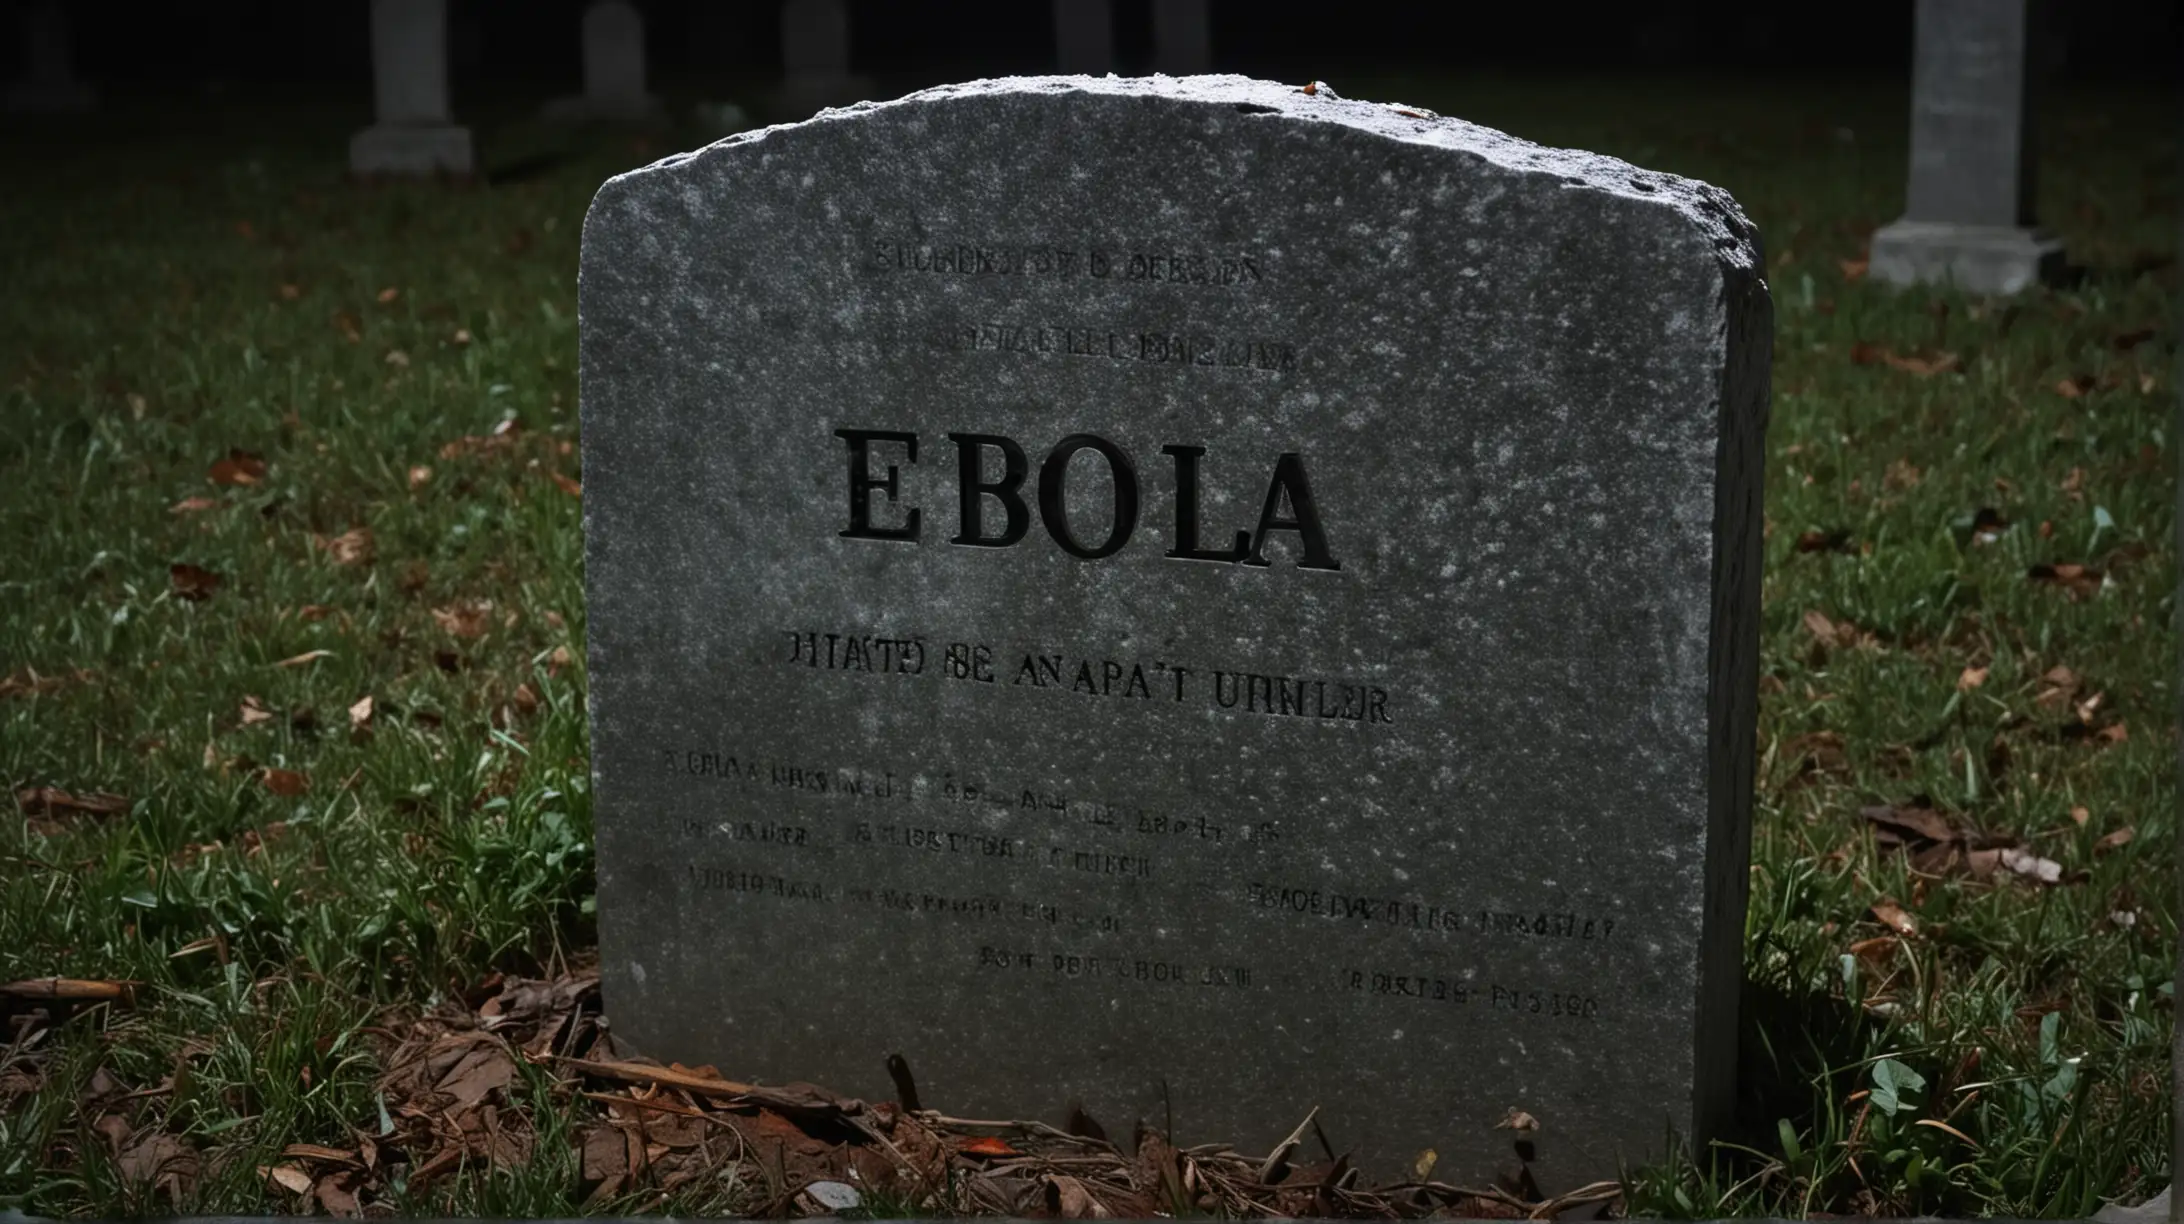 Gravestone that says “Ebola” on it at night in a creepy graveyard